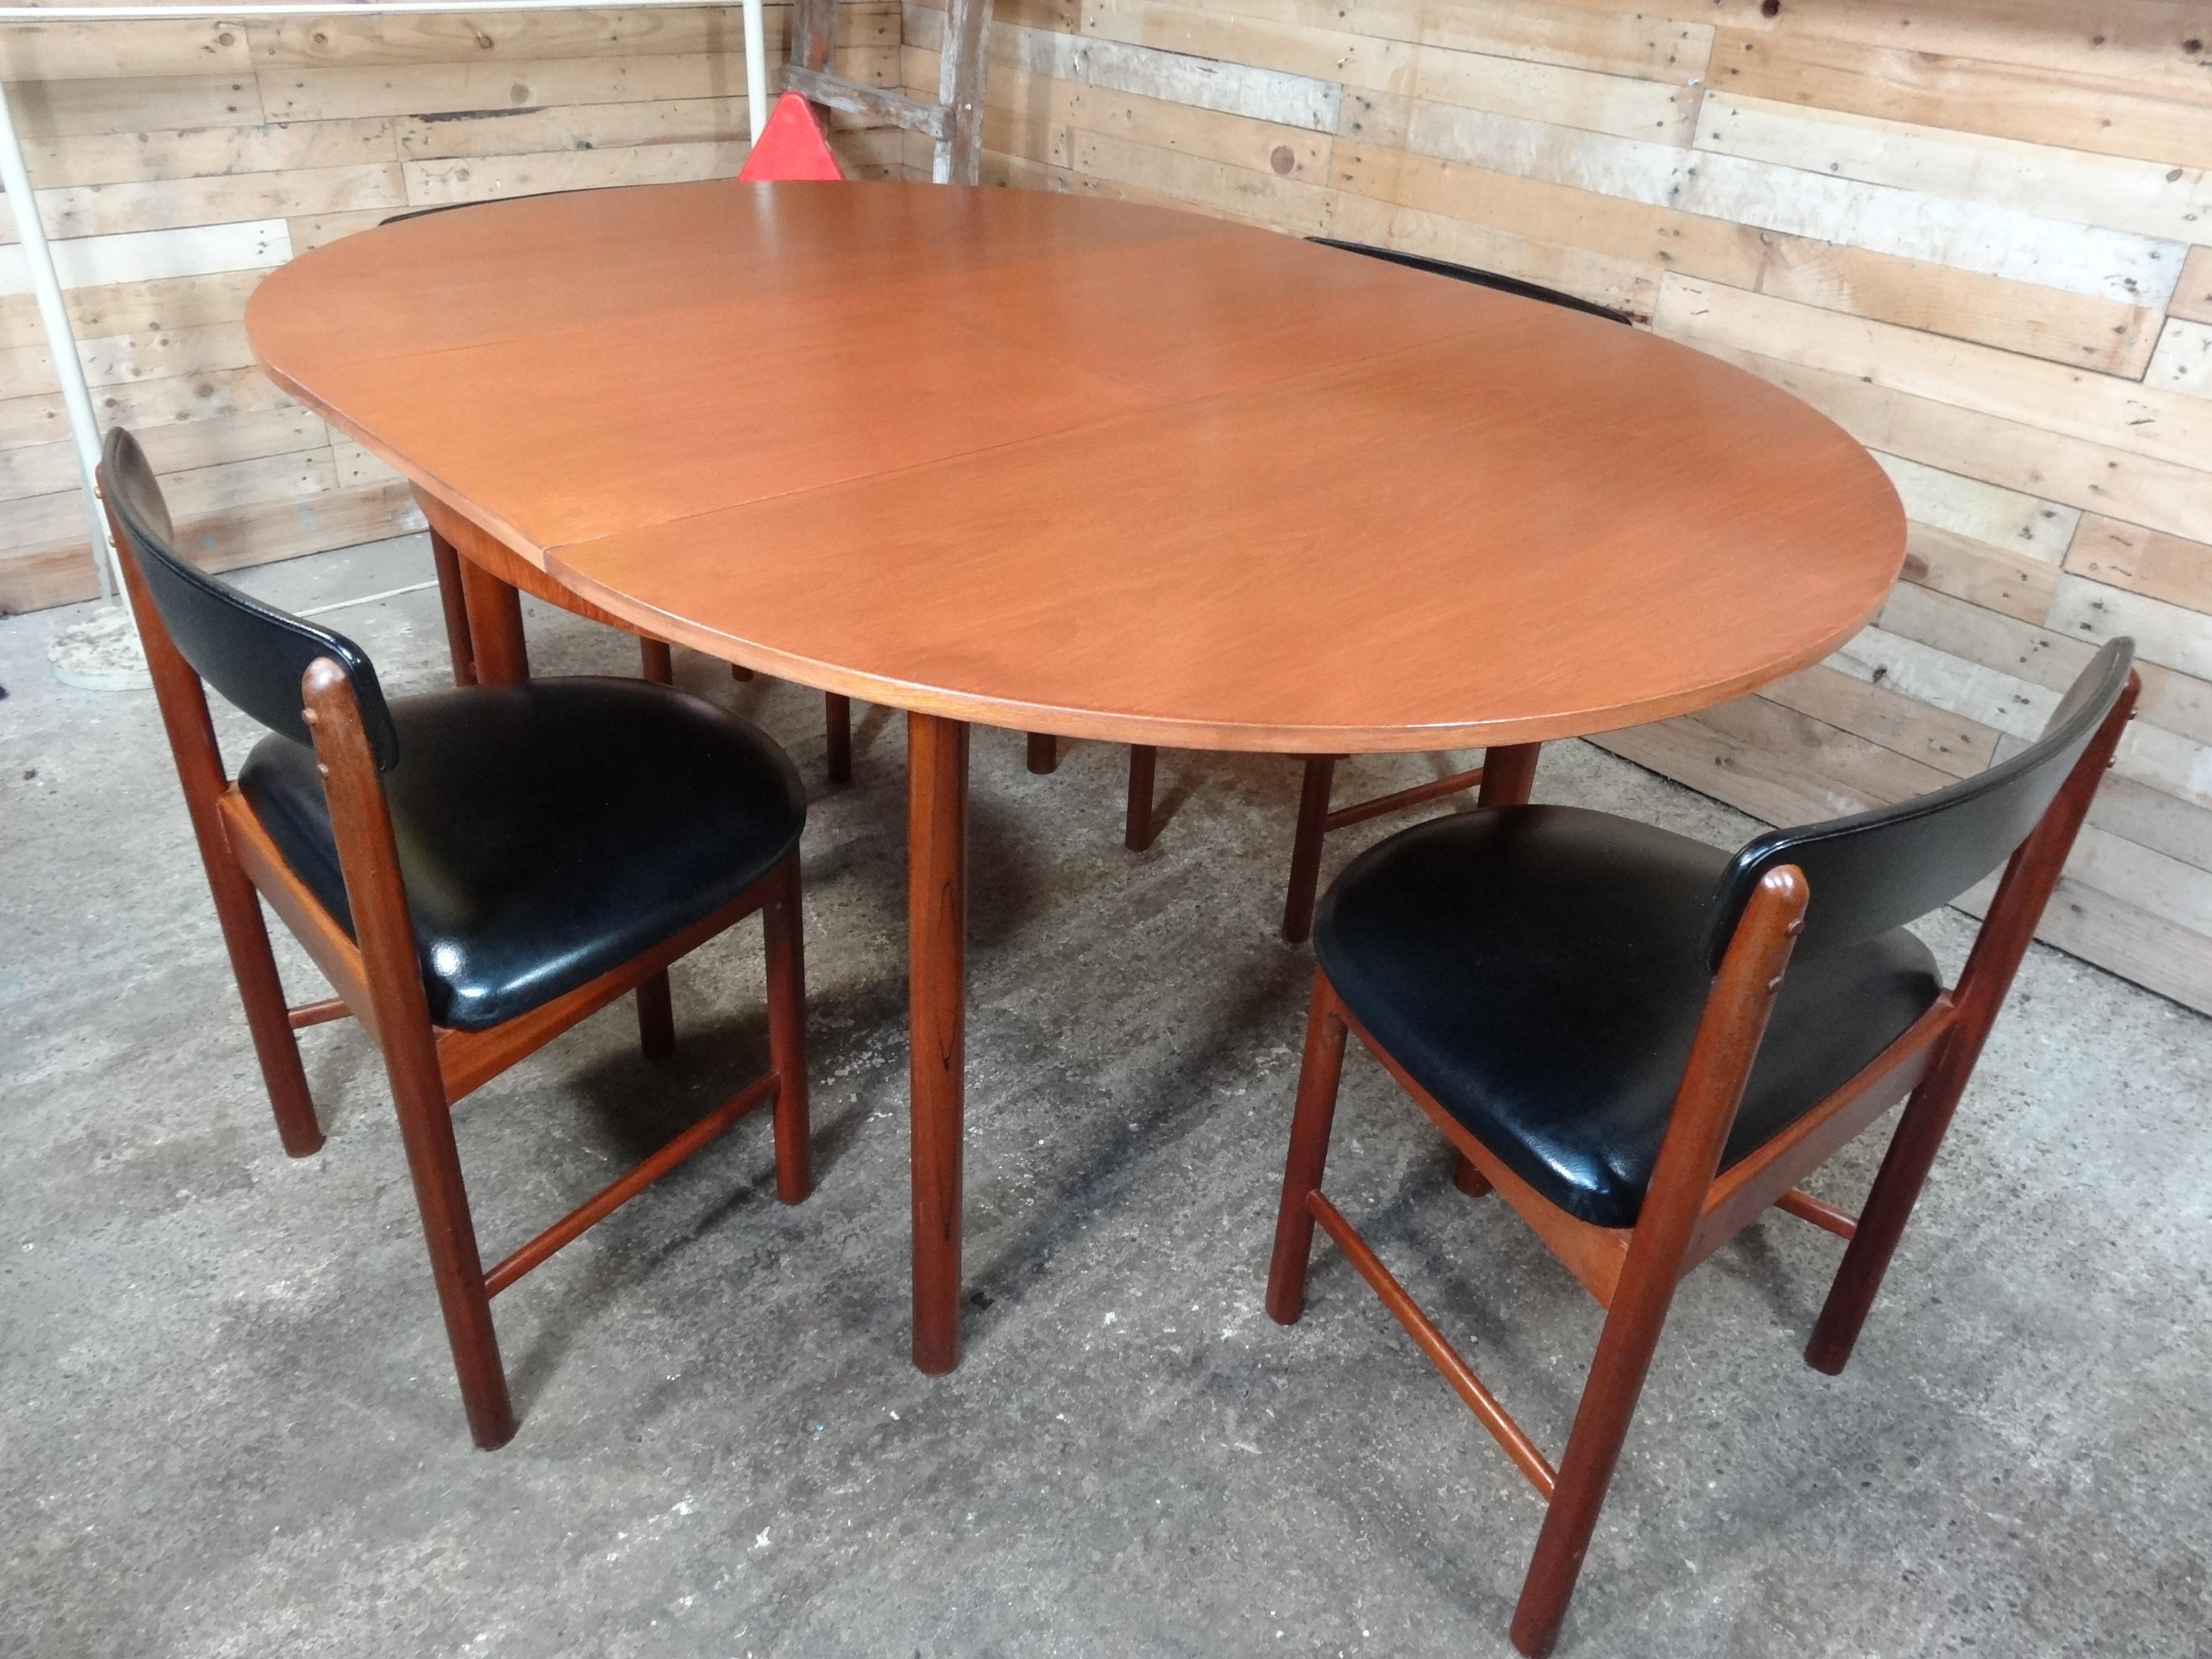 Mid-Century Modern Vintage Teak Foldout Dining Table 4 Chairs by Tom Robertson for McIntosh, 1960